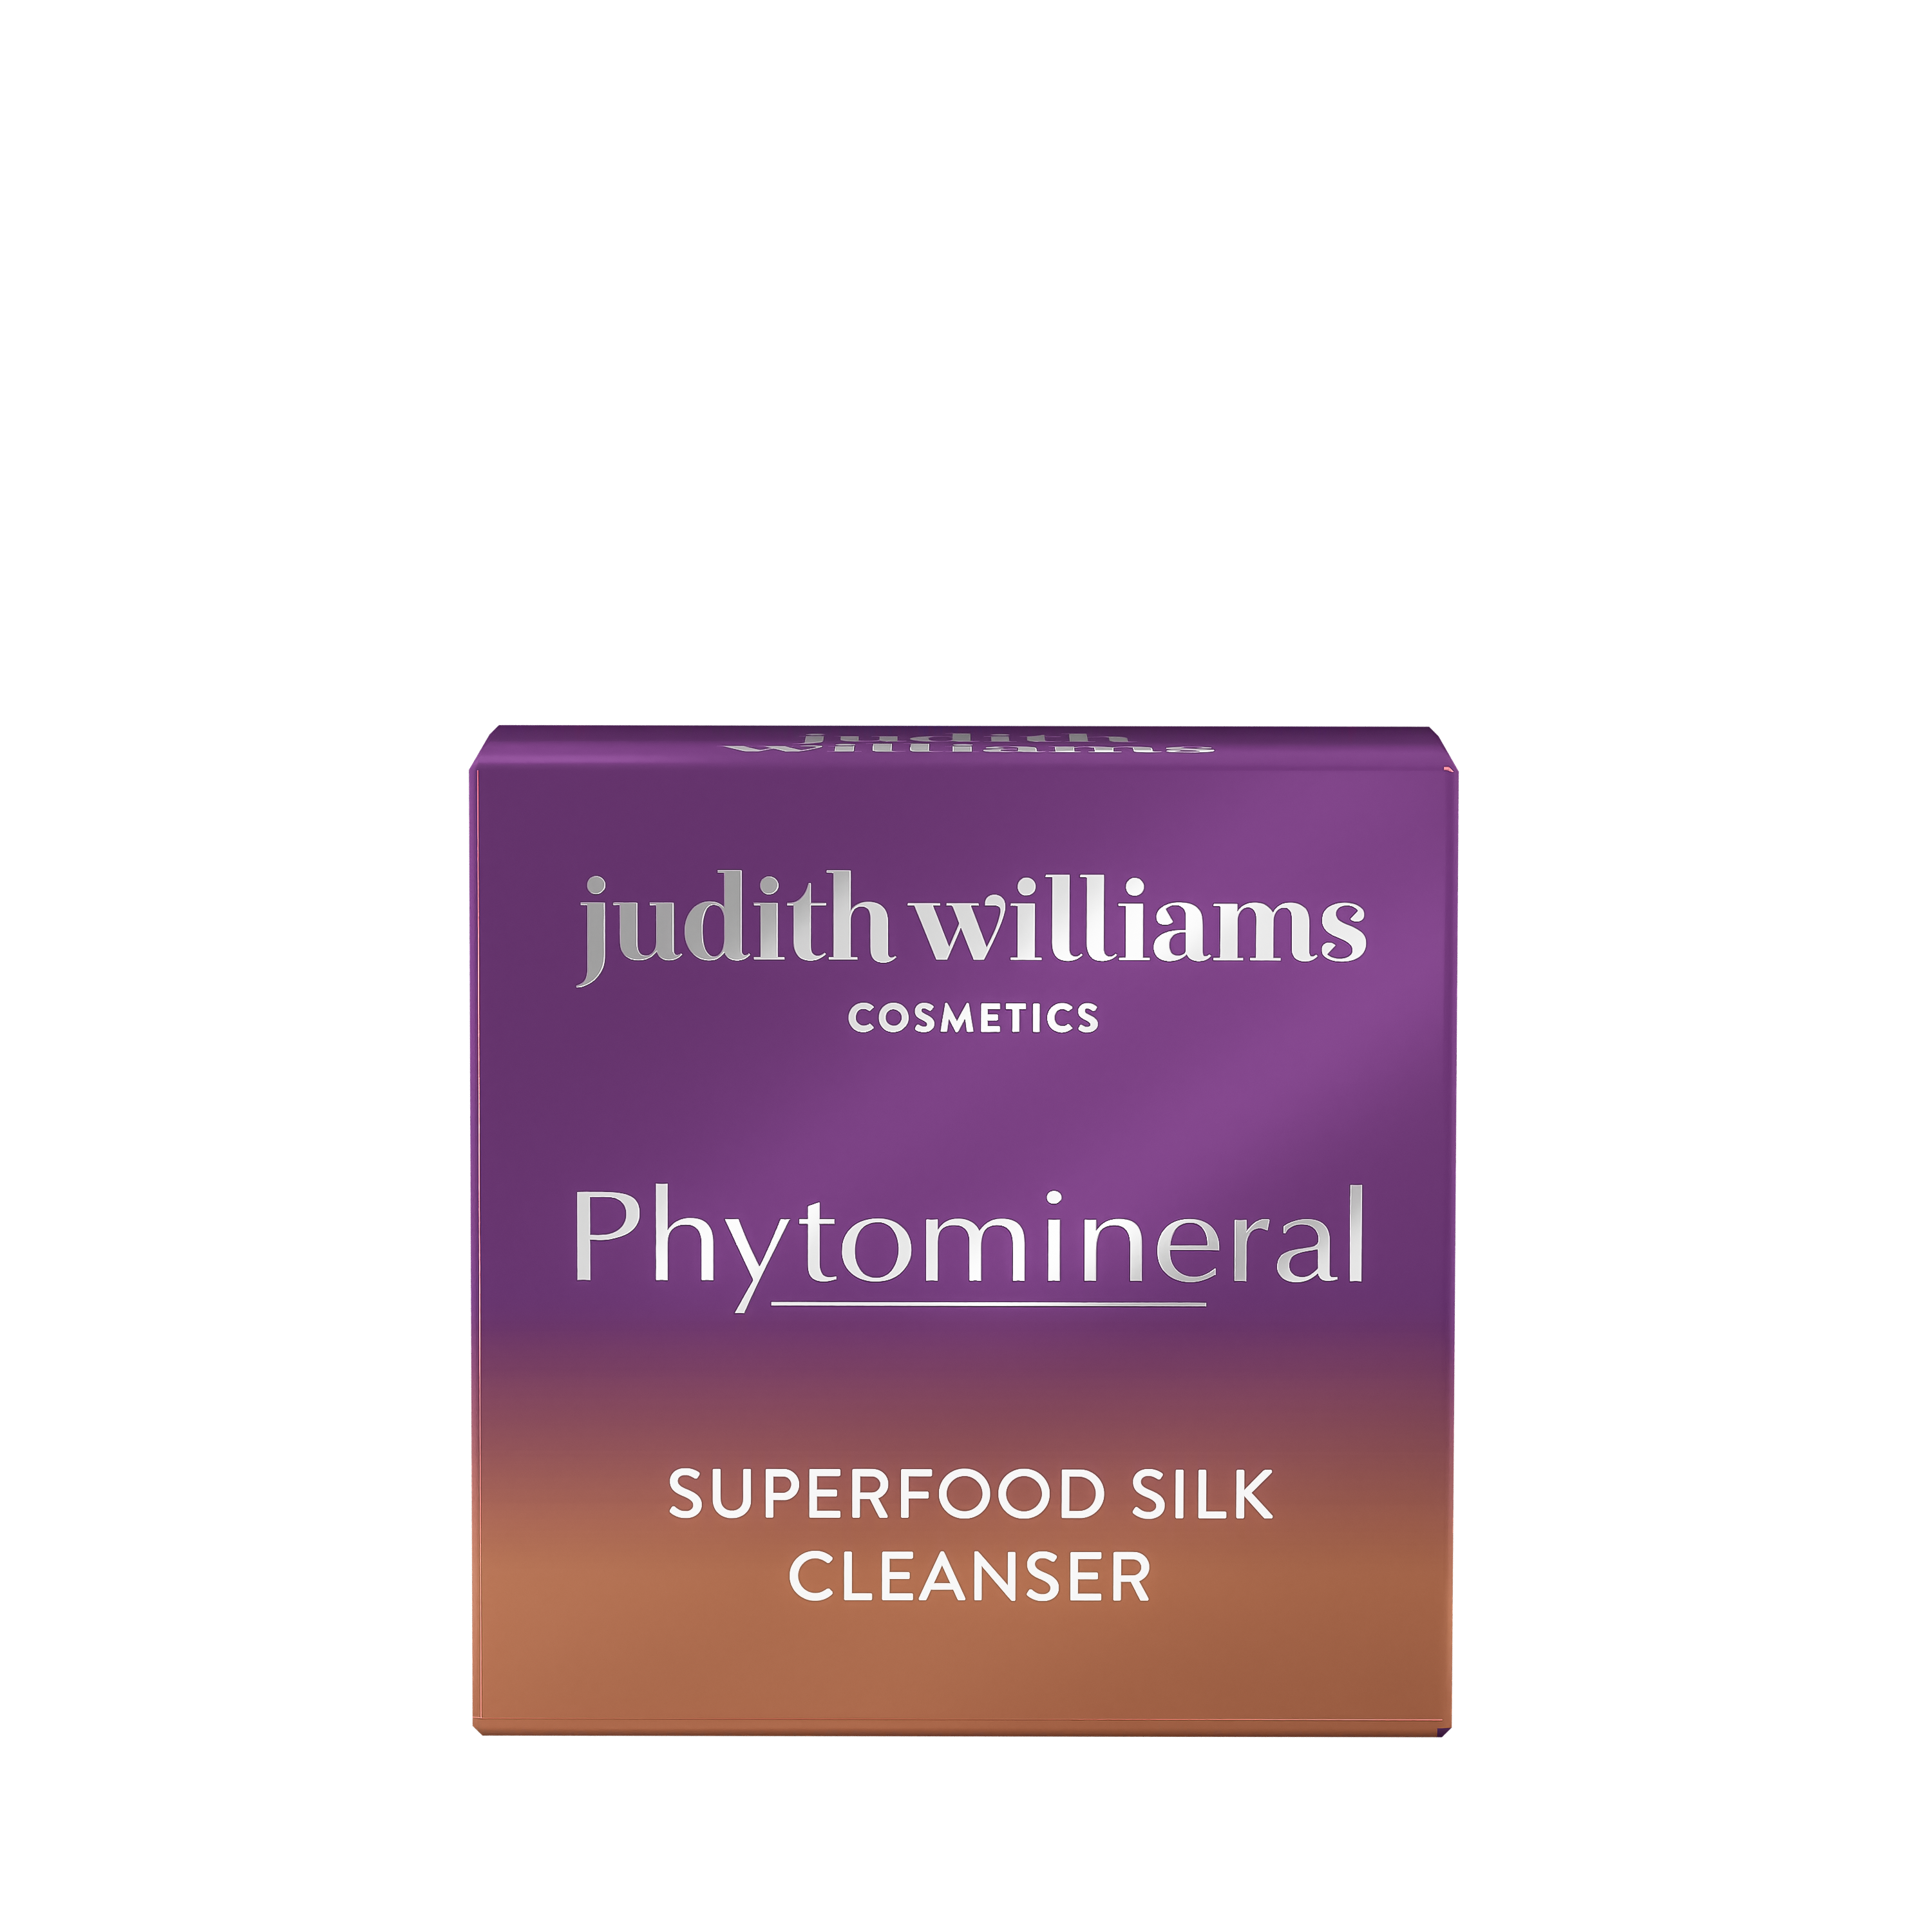 Gesichtsseife | Phytomineral | Superfood Silk Cleanser | Judith Williams